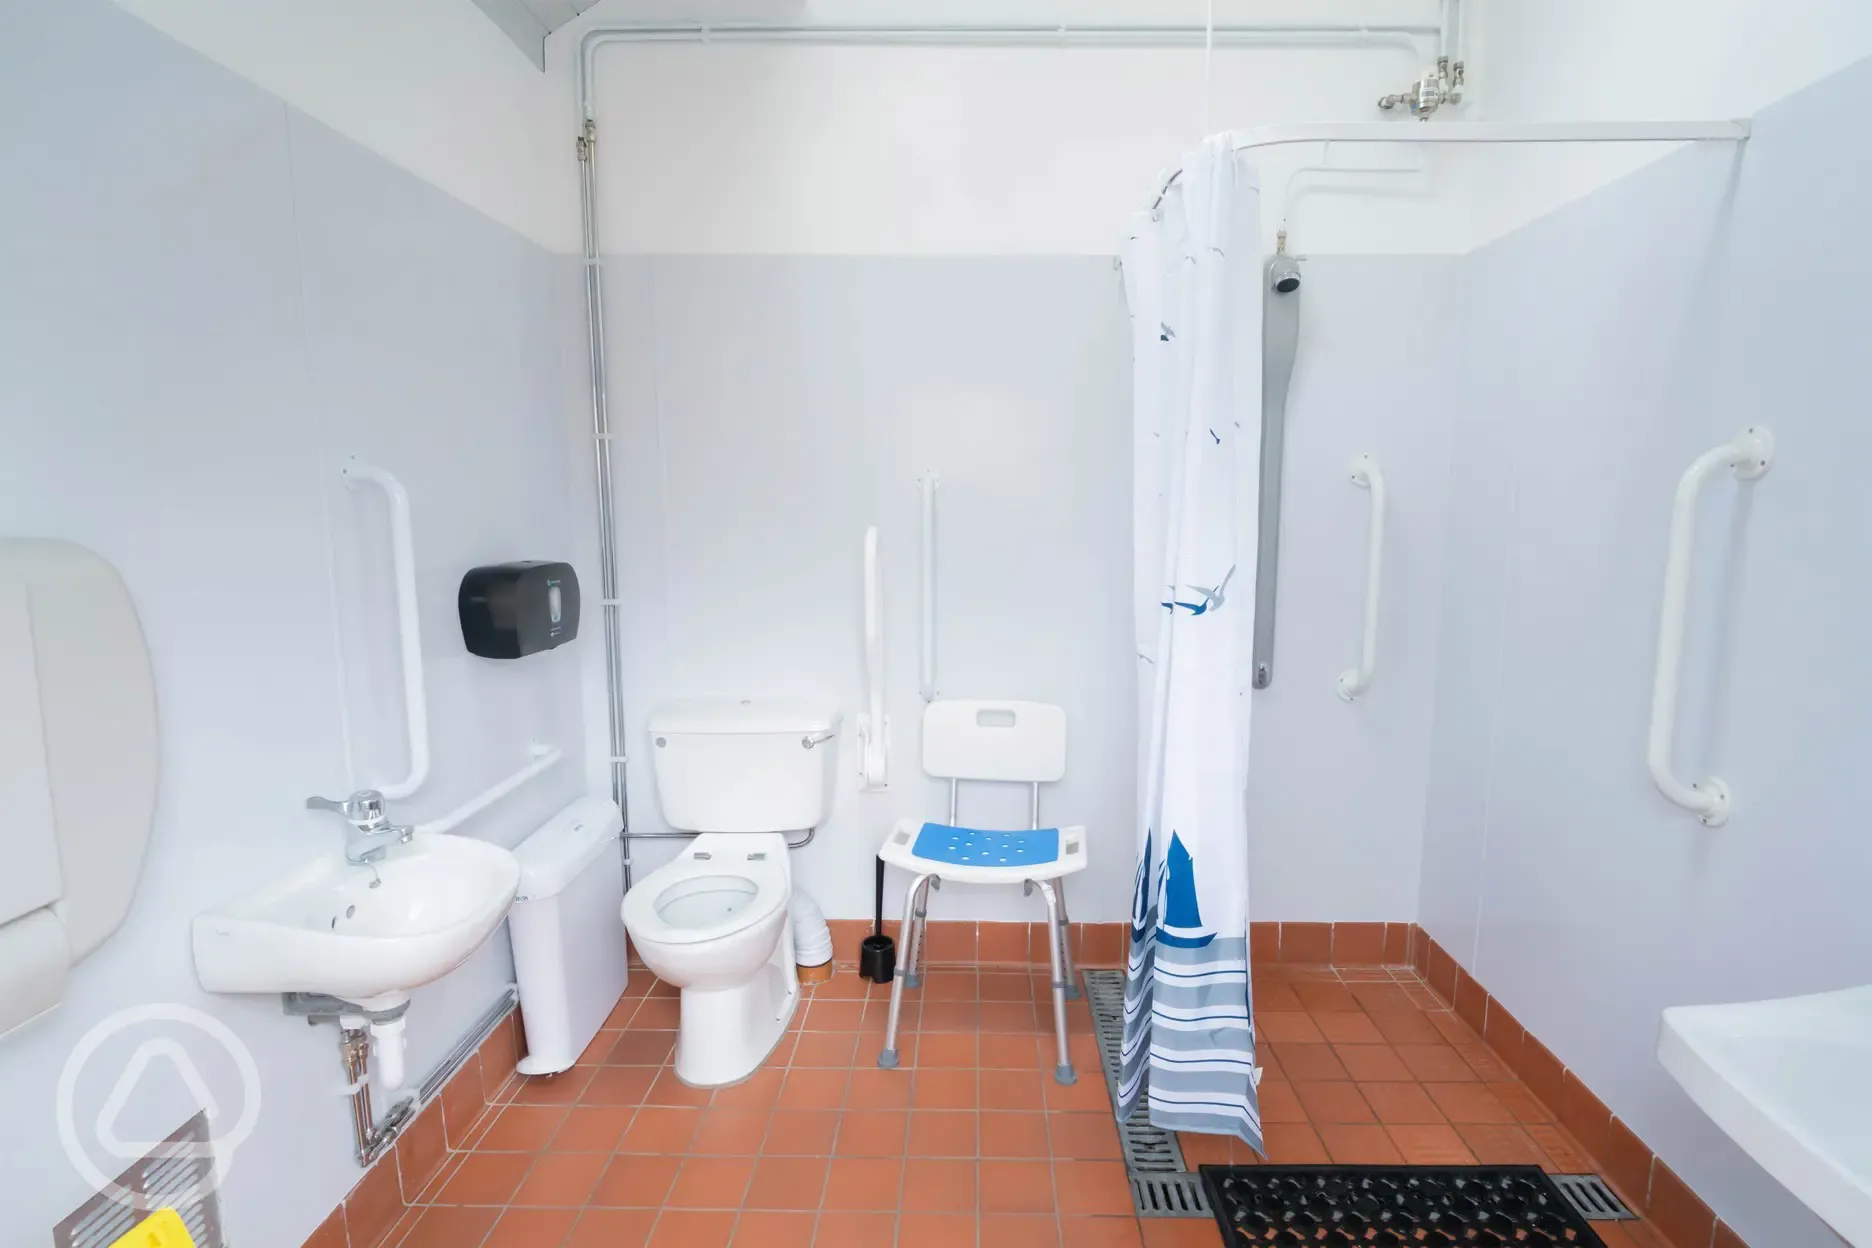 Disabled and baby changing bathroom